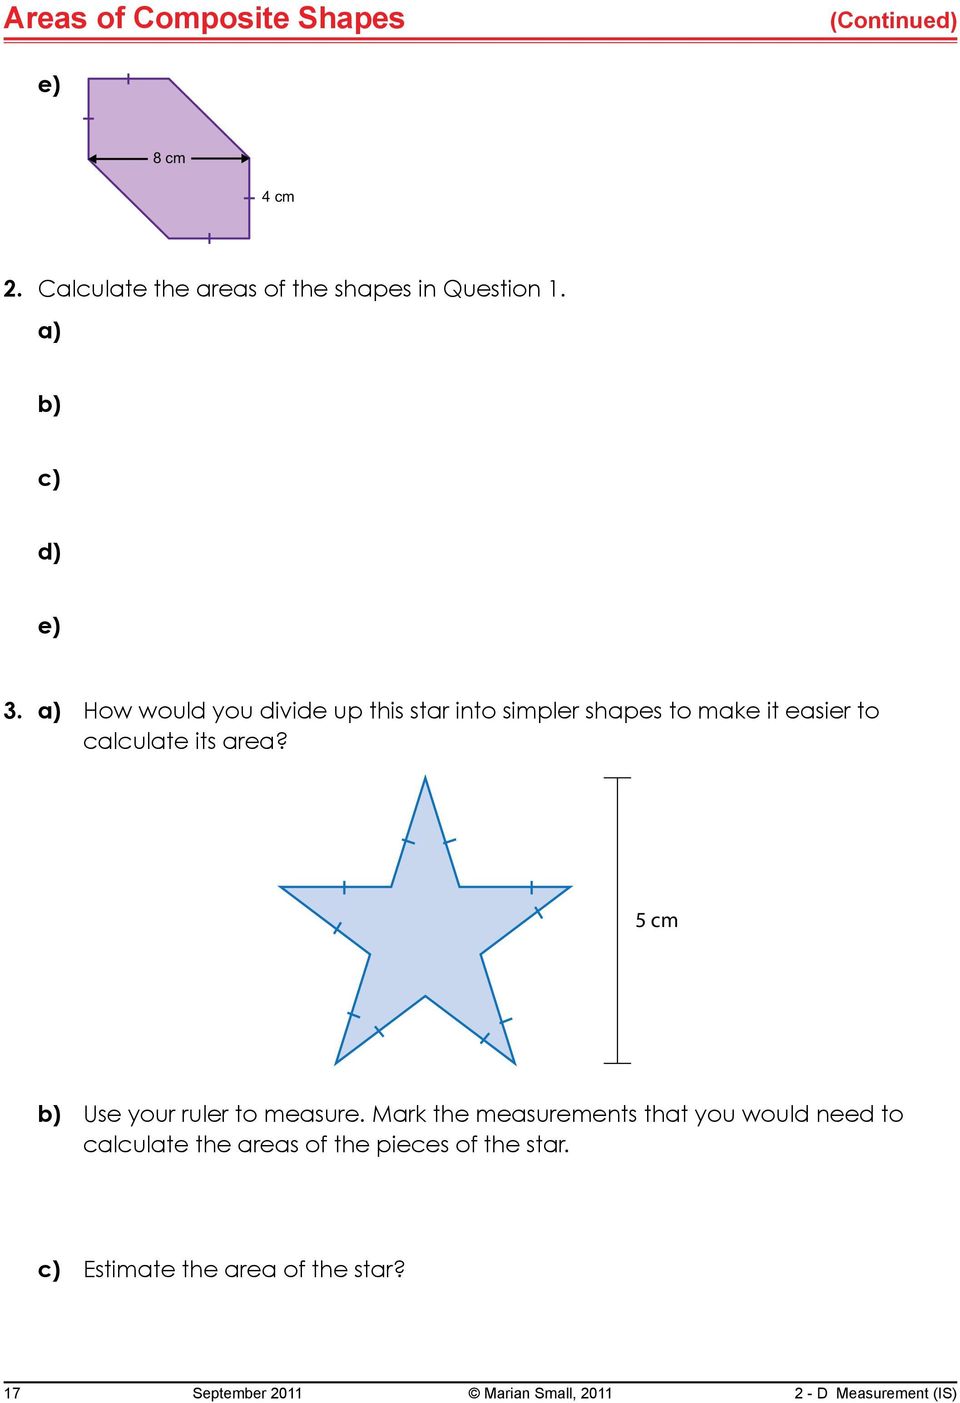 a) How would you divide up this star into simpler shapes to make it easier to calculate its area?